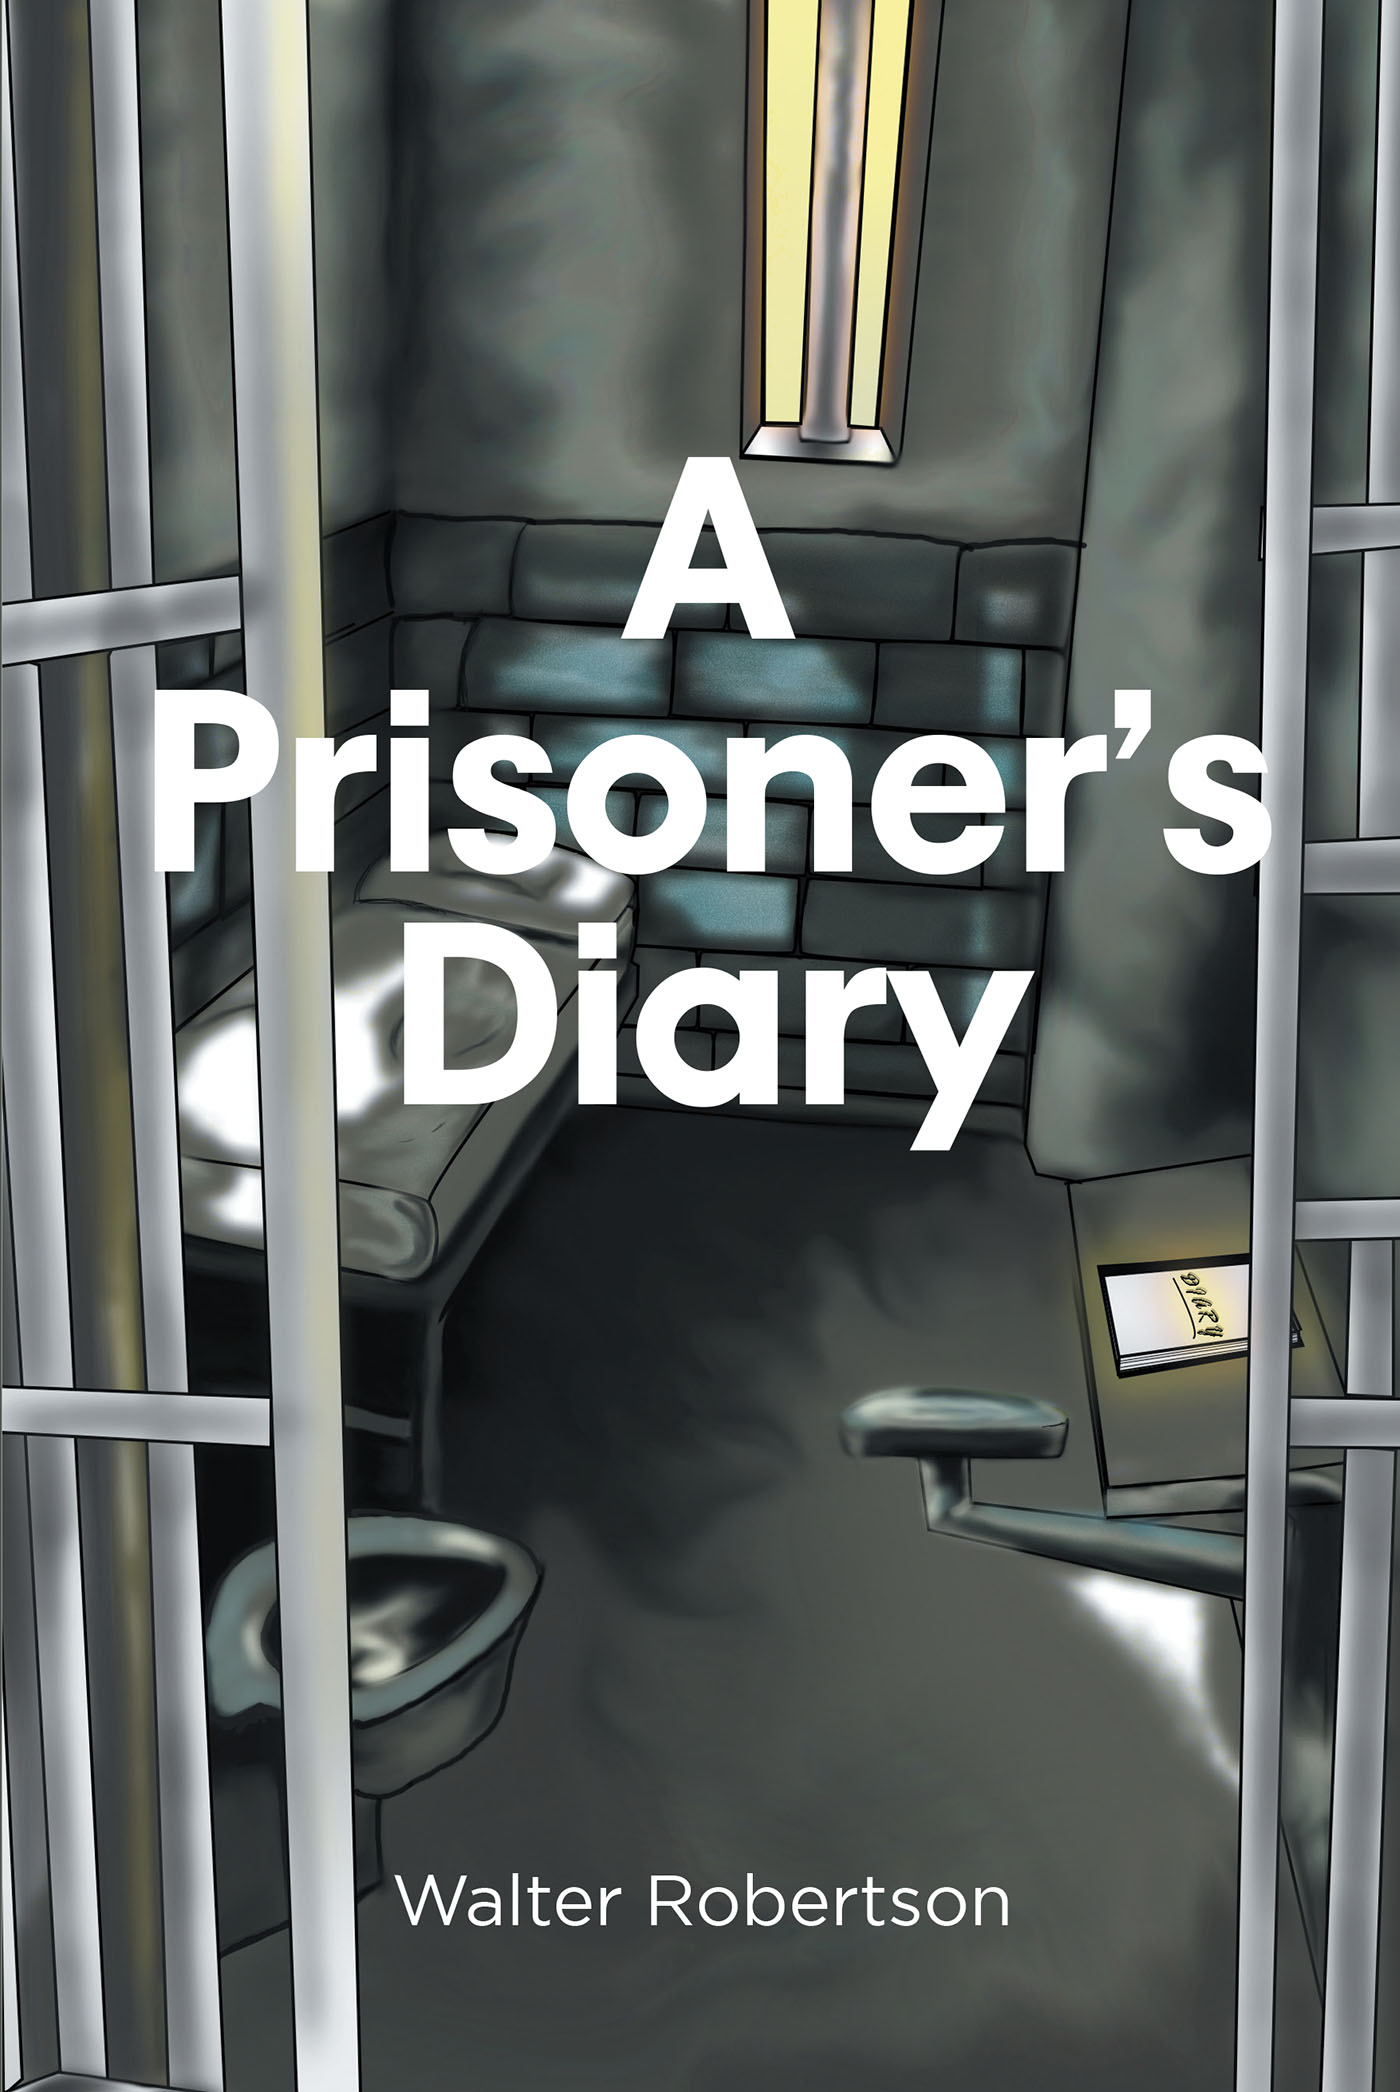 Author Walter Robertson’s New Book, "A Prisoner’s Diary," is a Collection of Candid Essays by Incarcerated Men and Women Revealing the Harsh Realities of Life Behind Bars